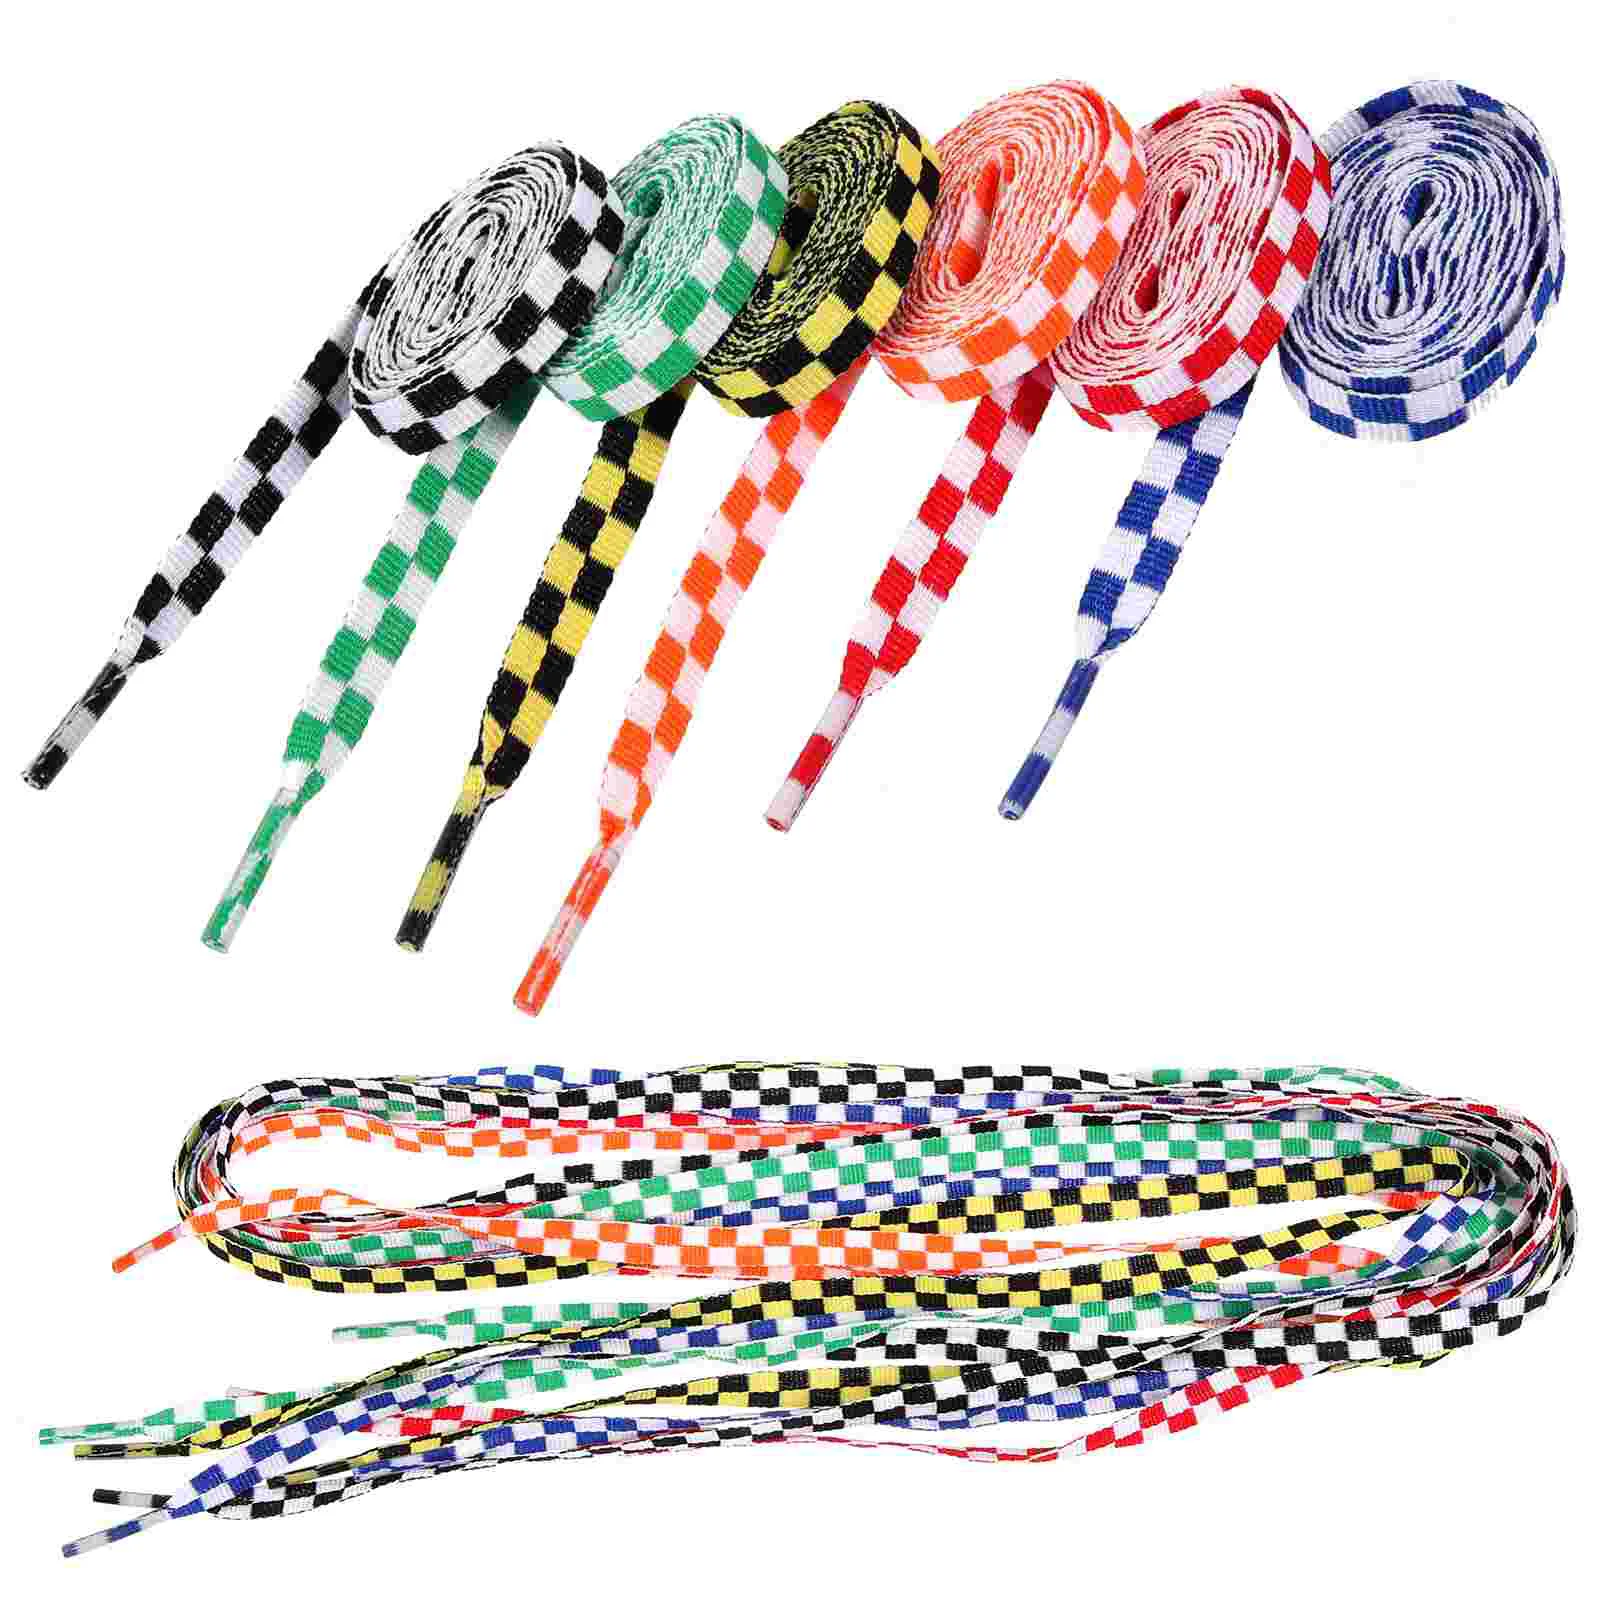 

12 Pairs of Flat Shoelaces Circular Shoestring Decorative Shoelaces Casual Sneakers Shoe Laces